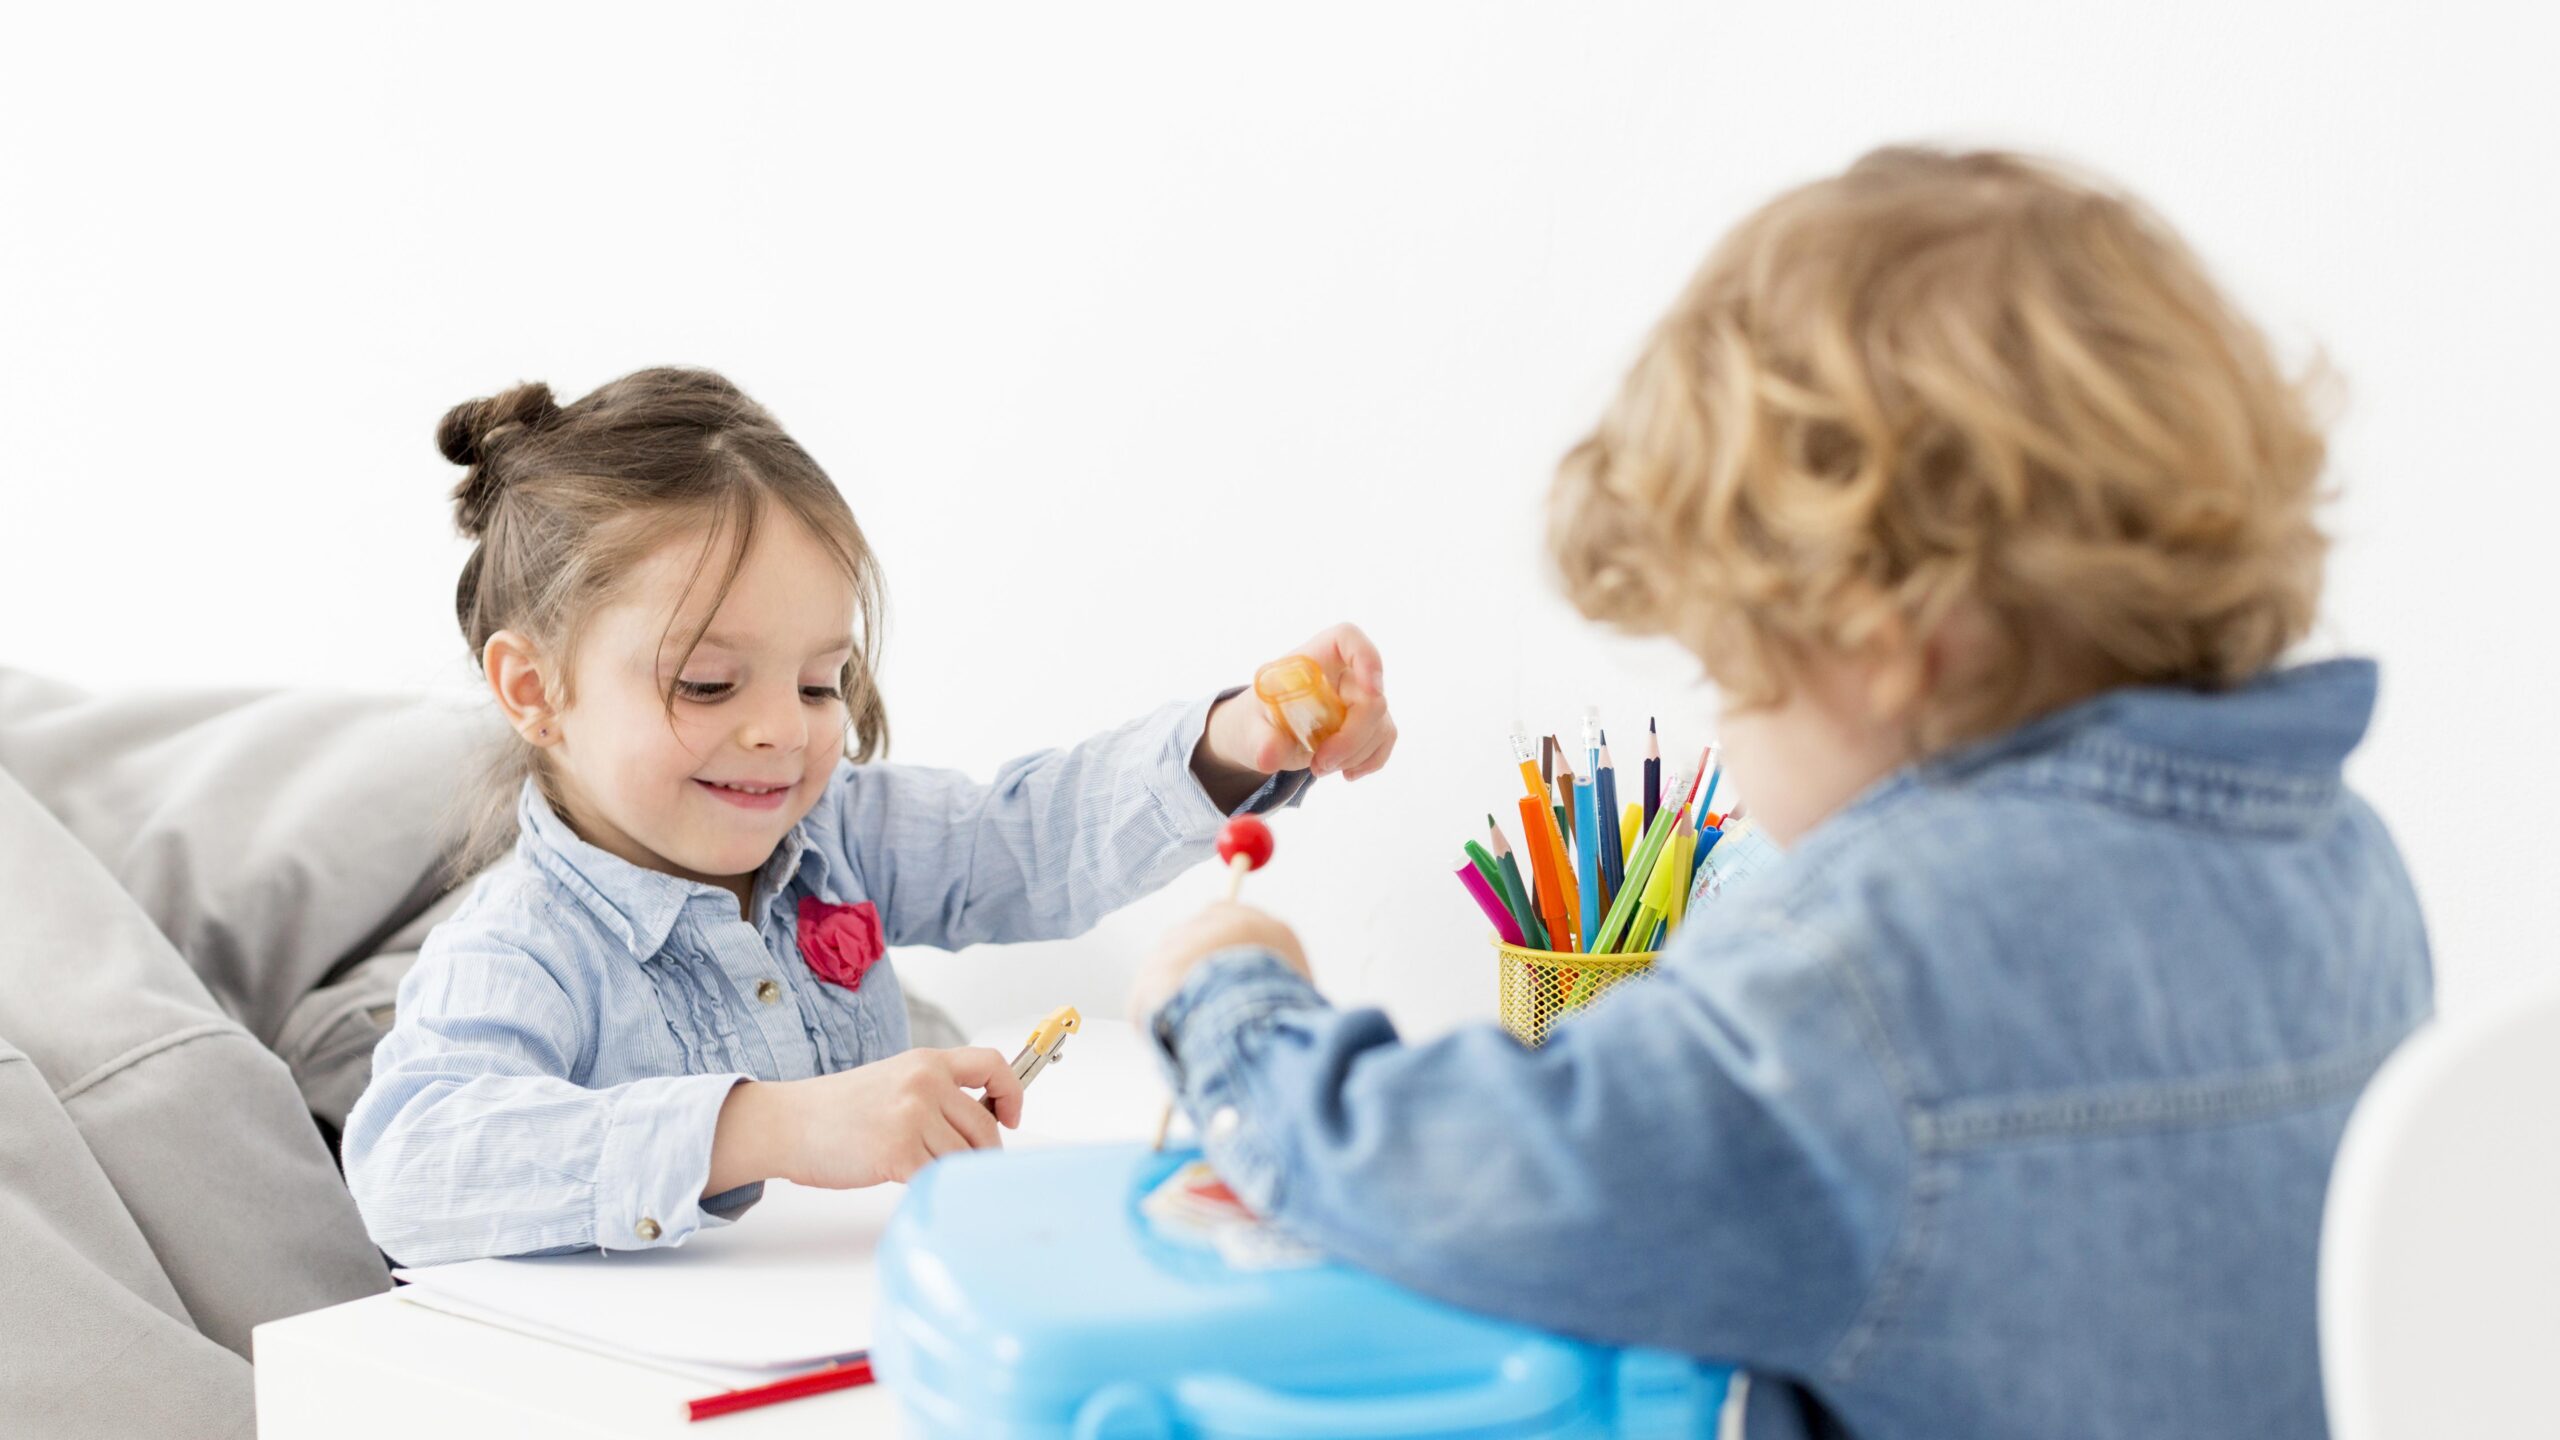 Daycare vs Play School What's Better for Your Child